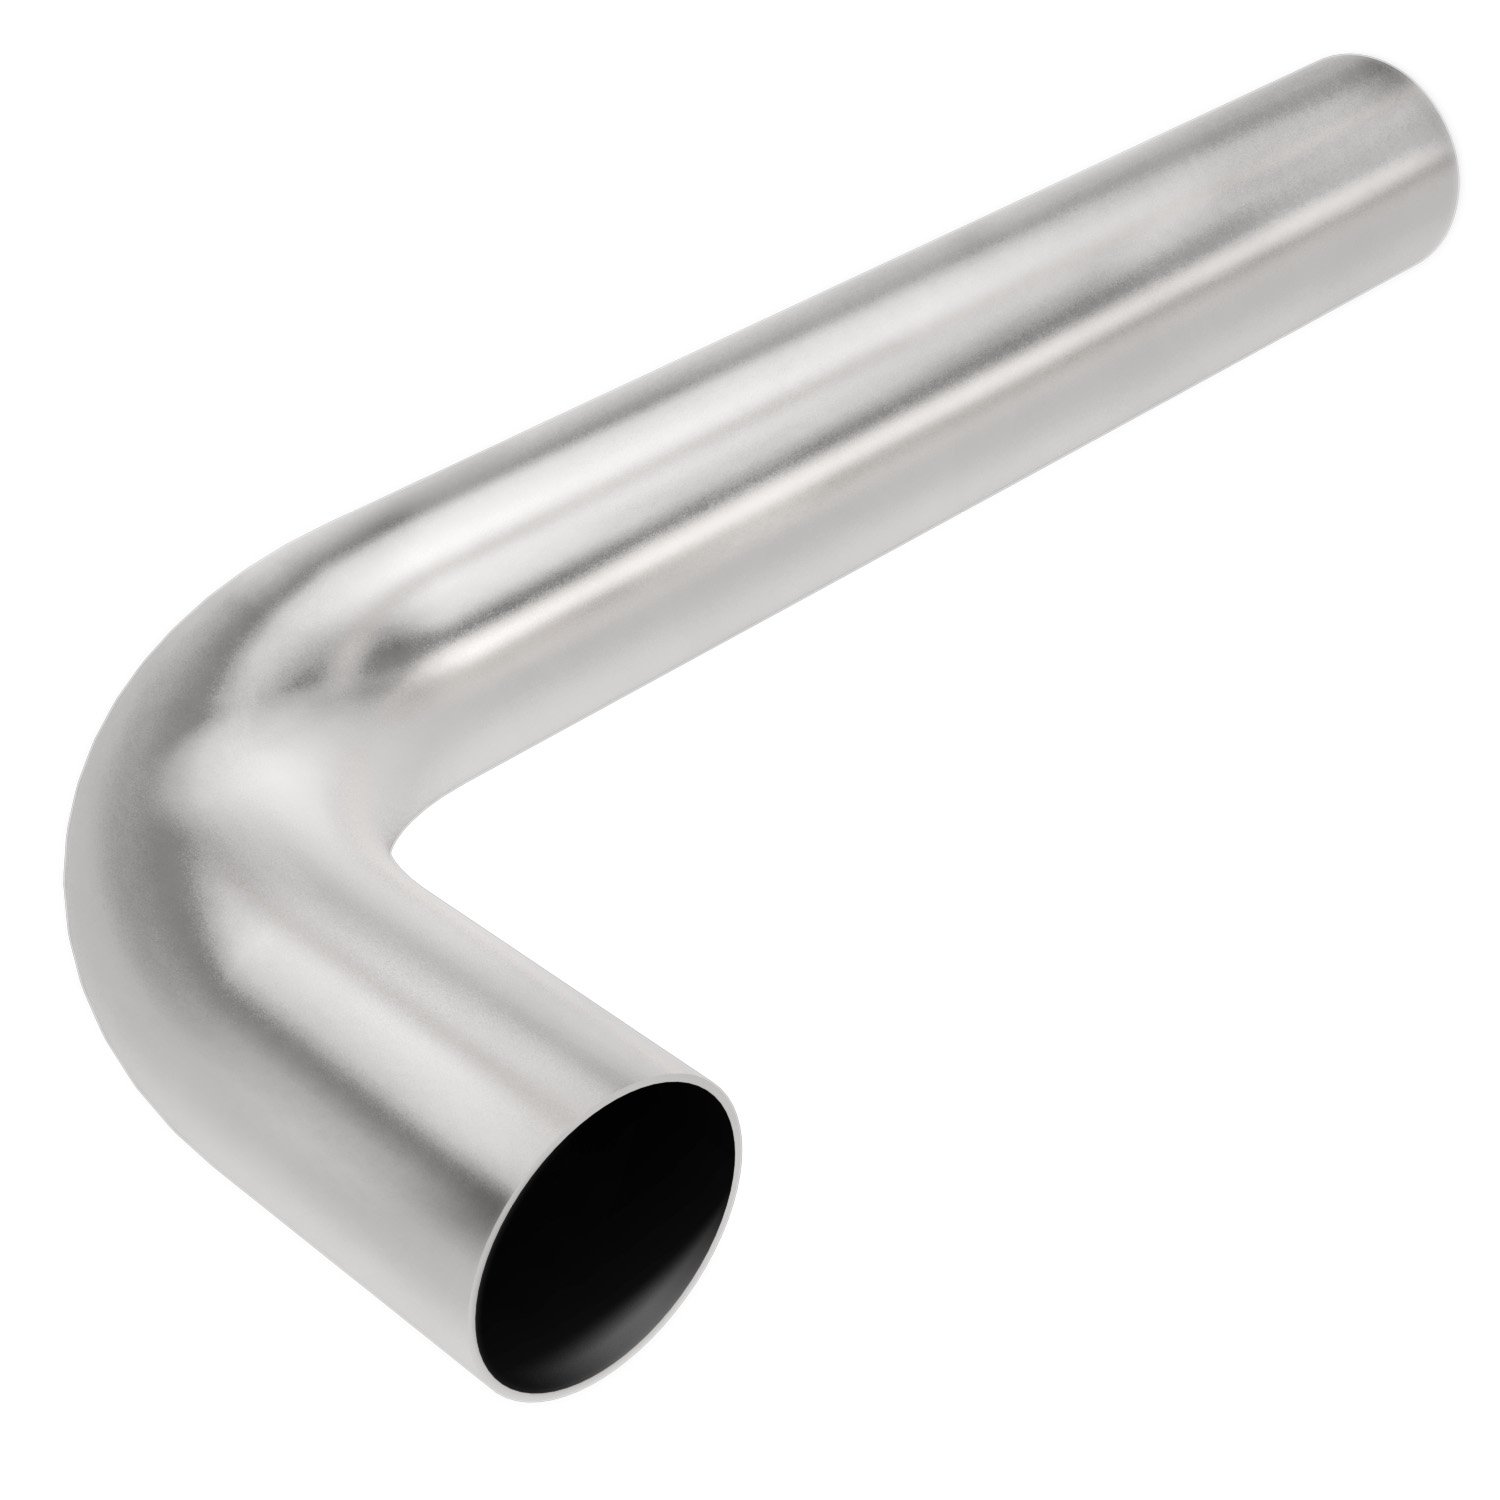 Stainless Steel 90° Transition Exhaust Pipe Outside Diameter: 3"